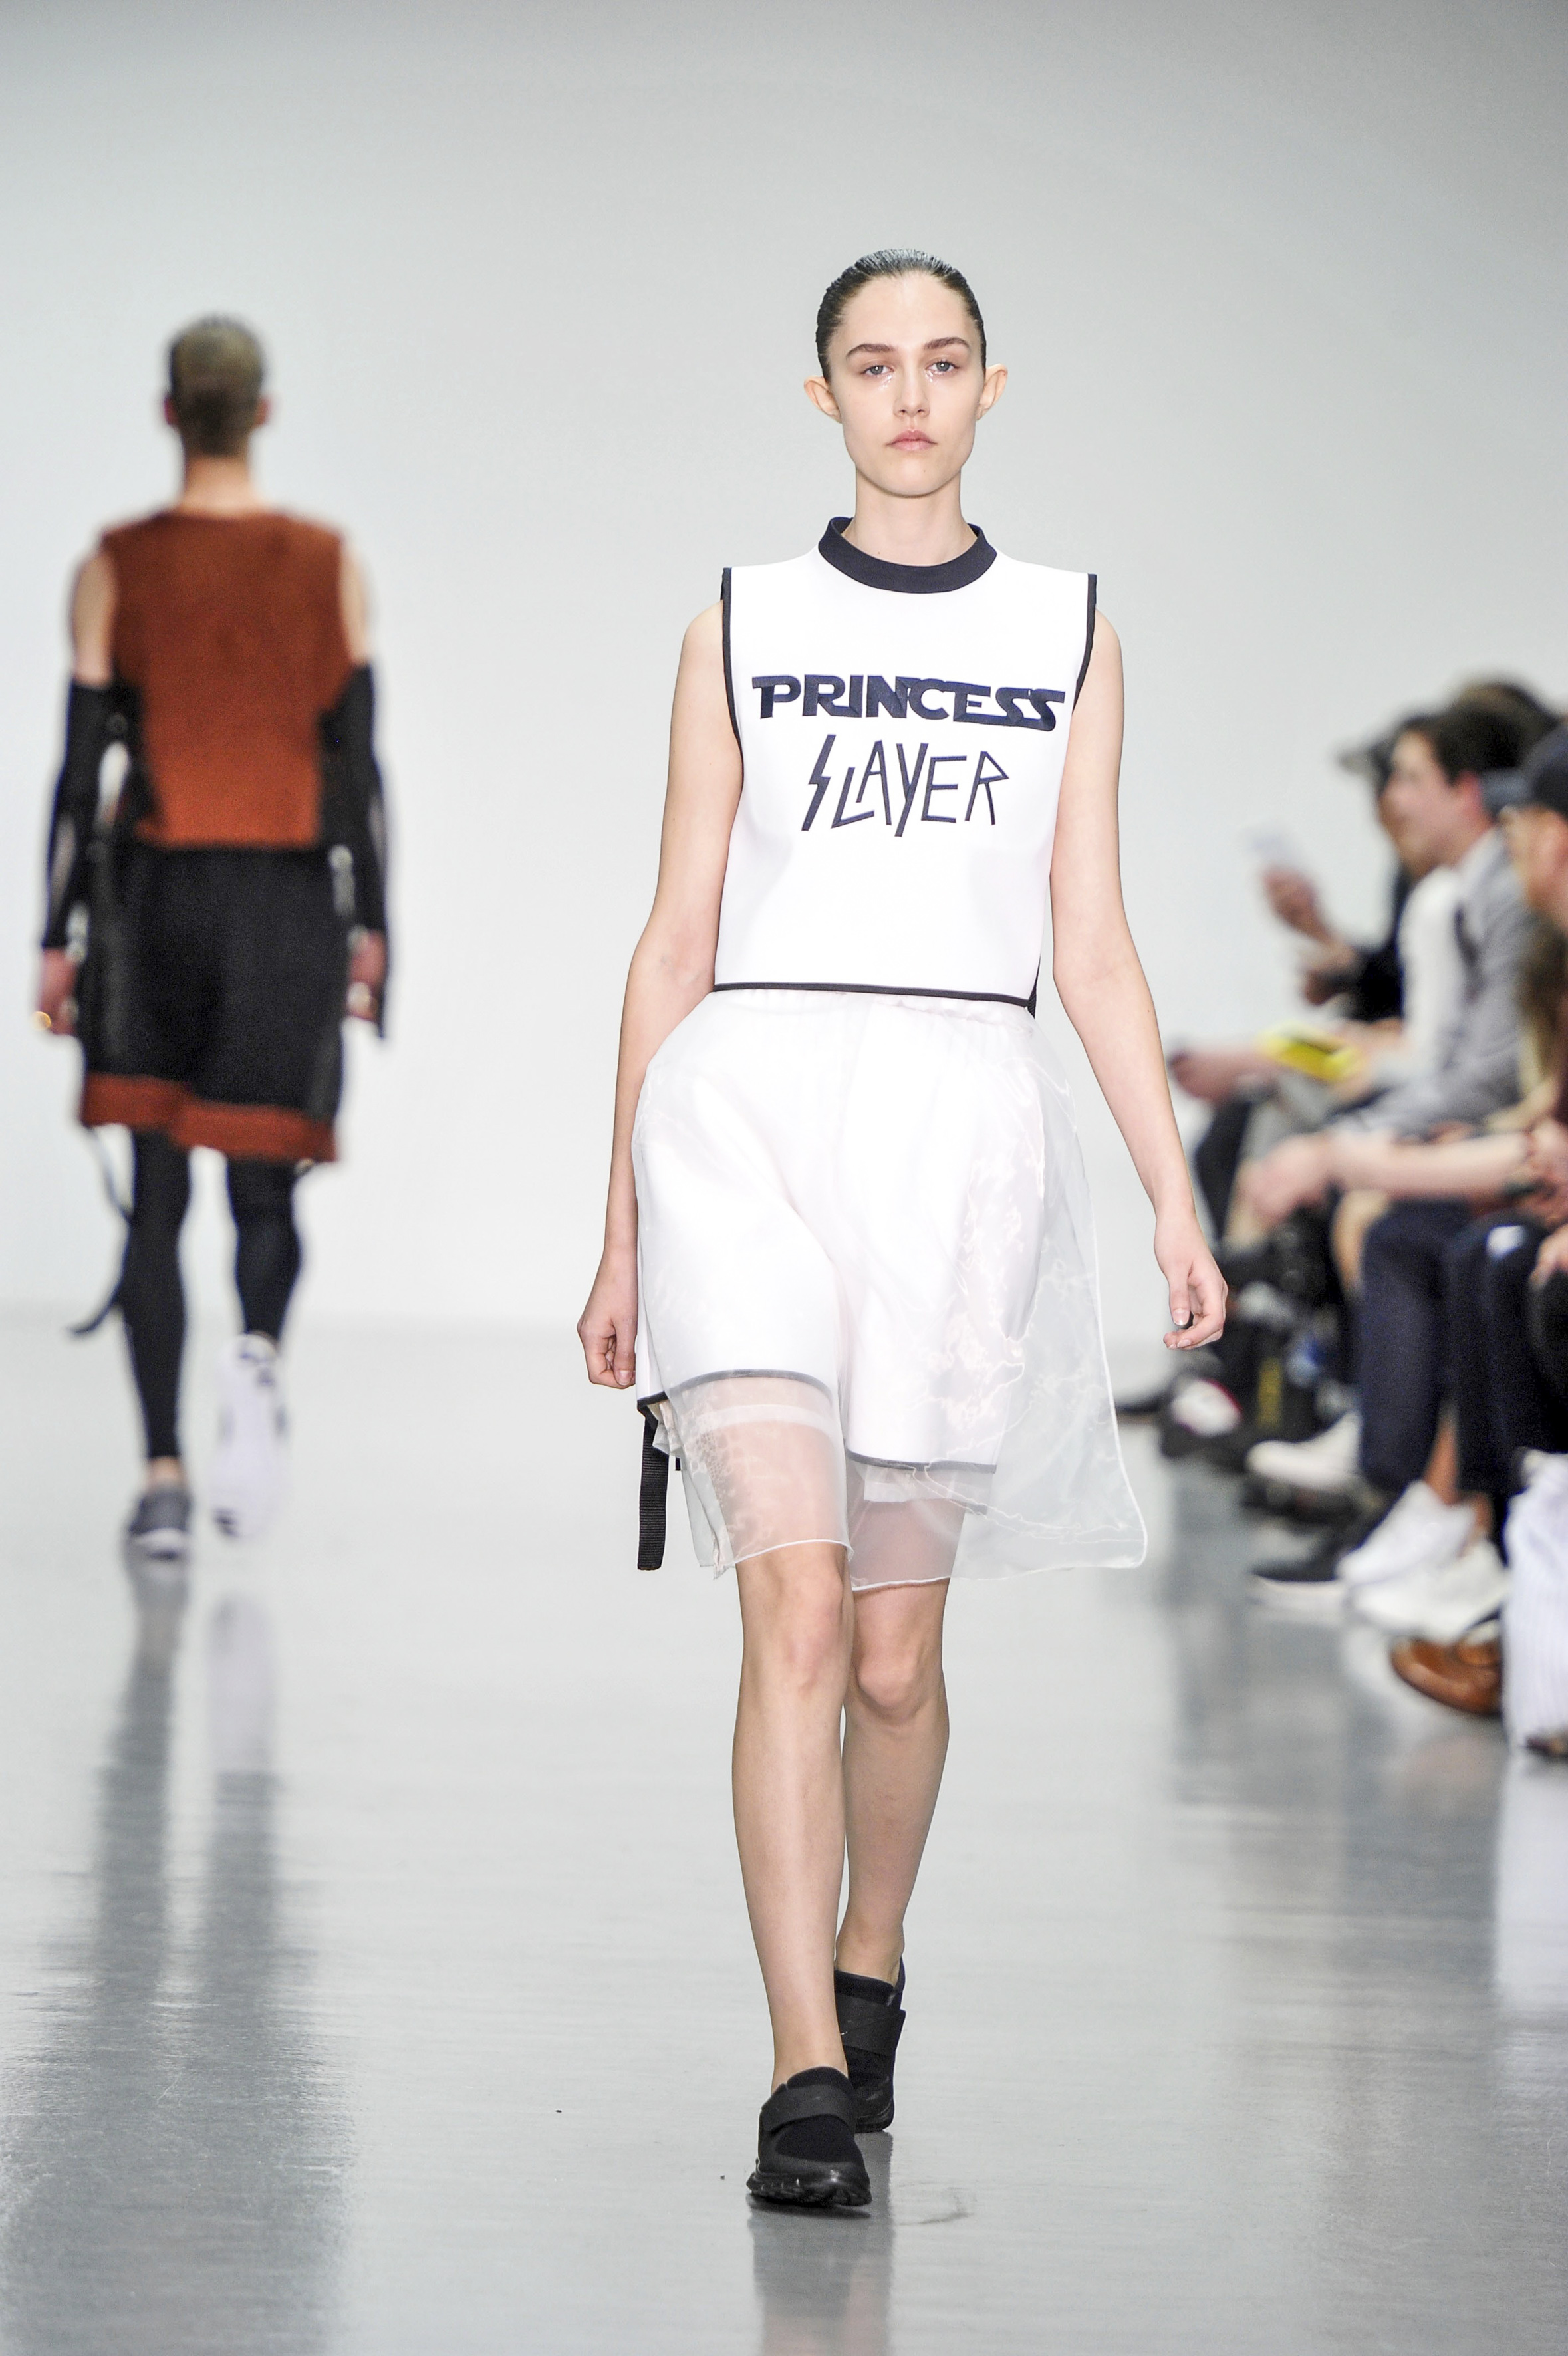 may-the-force-dress-you-star-wars-moda-bobby-abley-ss16-3